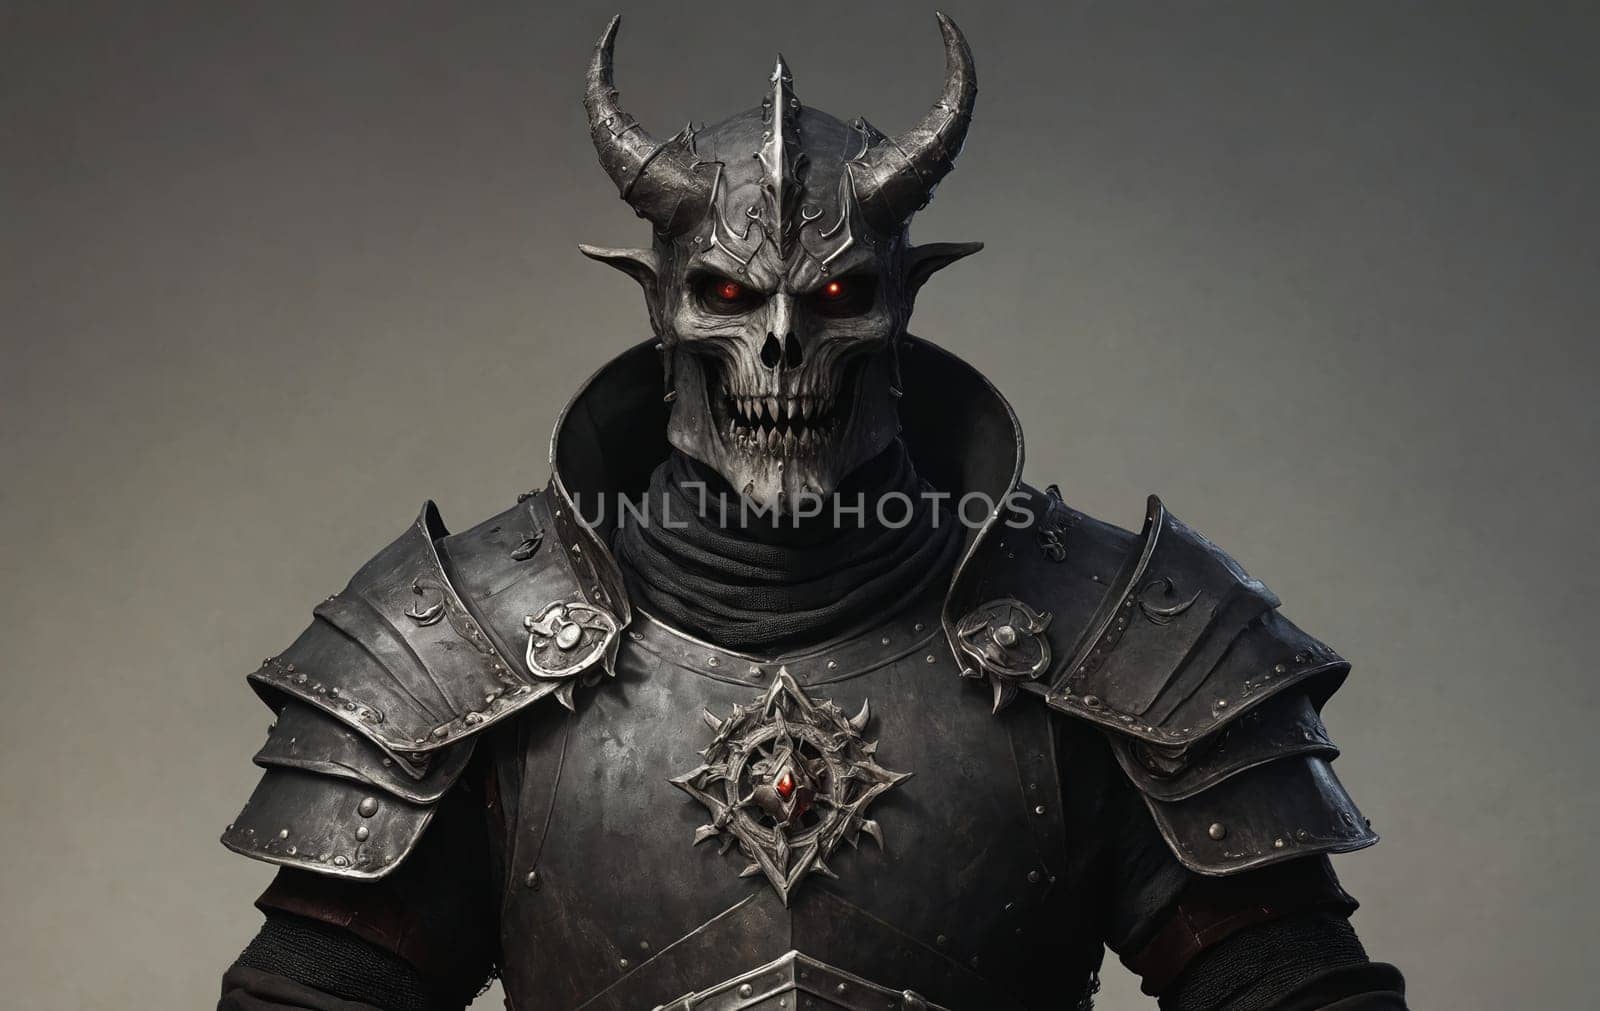 A digital rendering of a knight with a sinister skull head; a blend of medieval and fantasy themes.